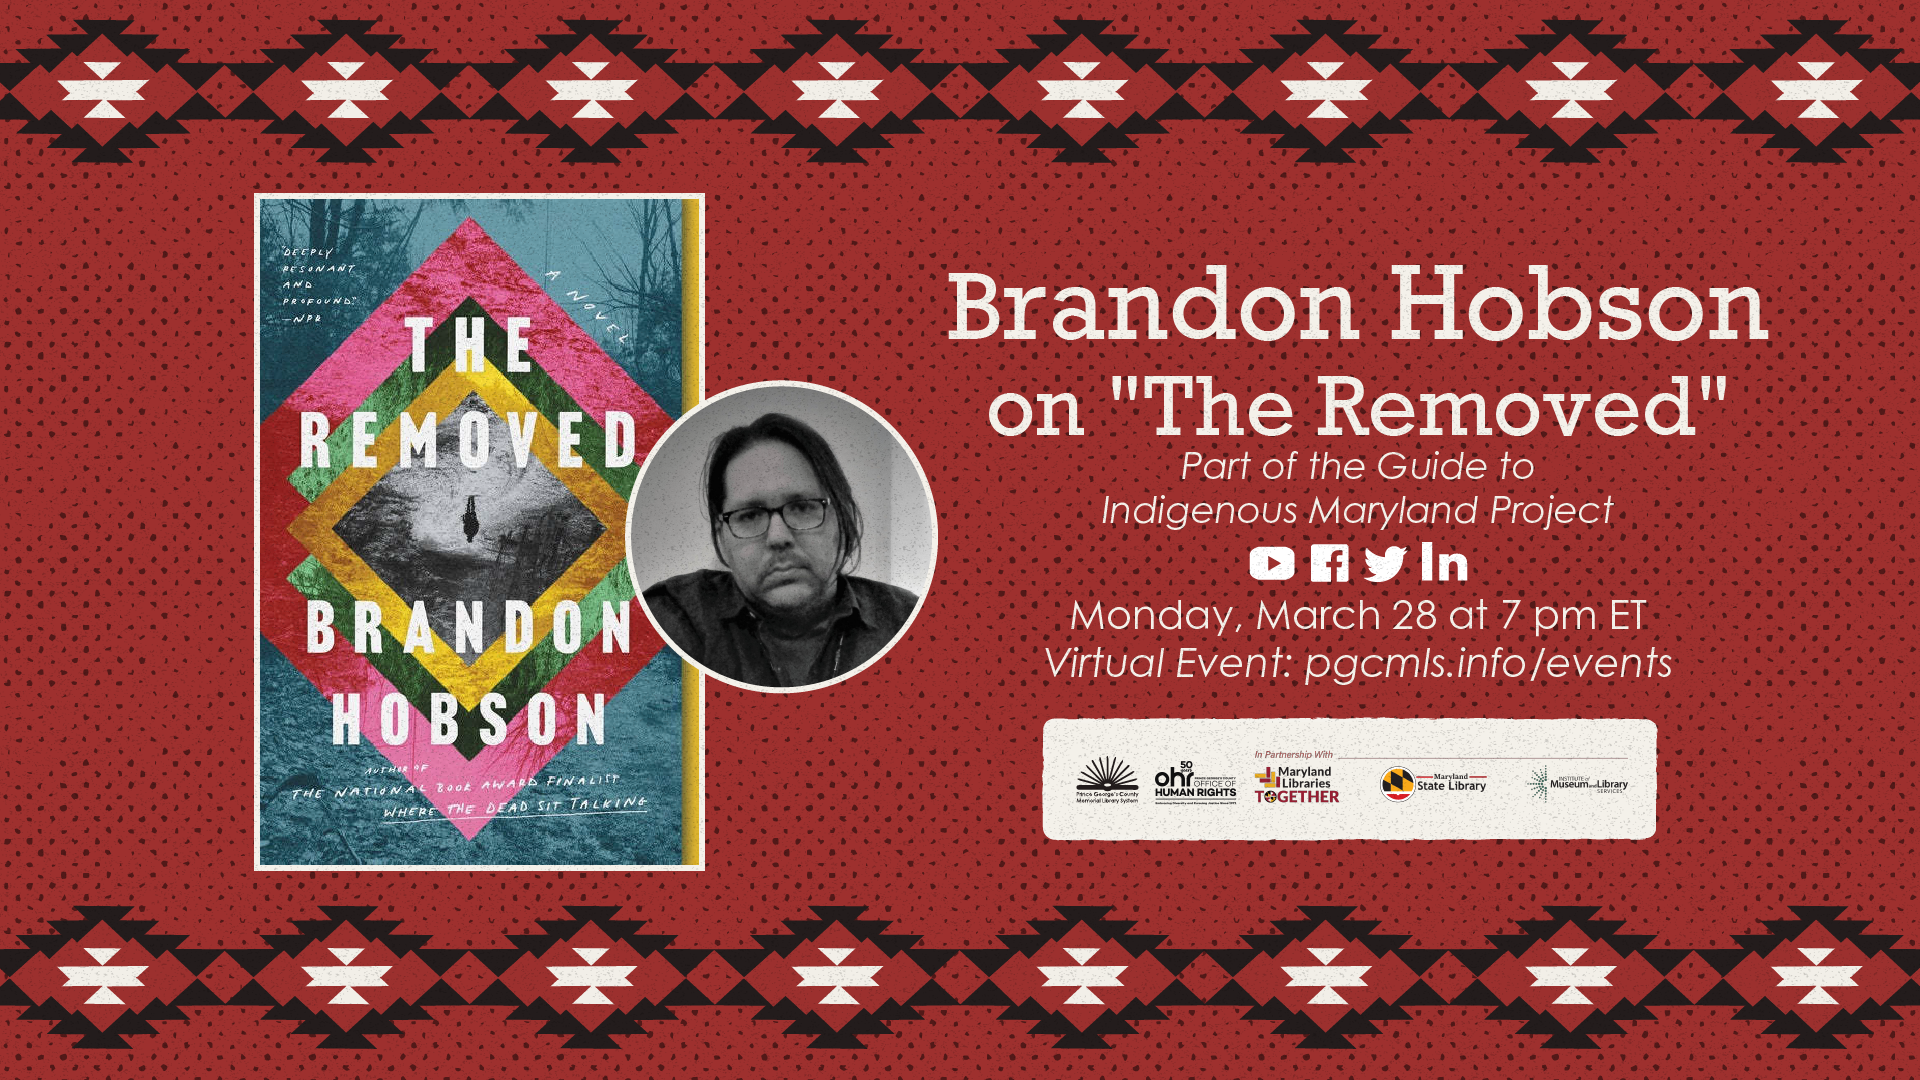 Brandon Hobson on "The Removed" Part of the Guide to Indigenous Maryland Project.  Monday March 28 at 7 PM ET.  The Removed book cover and photo of the author, Brandon Hobson. 